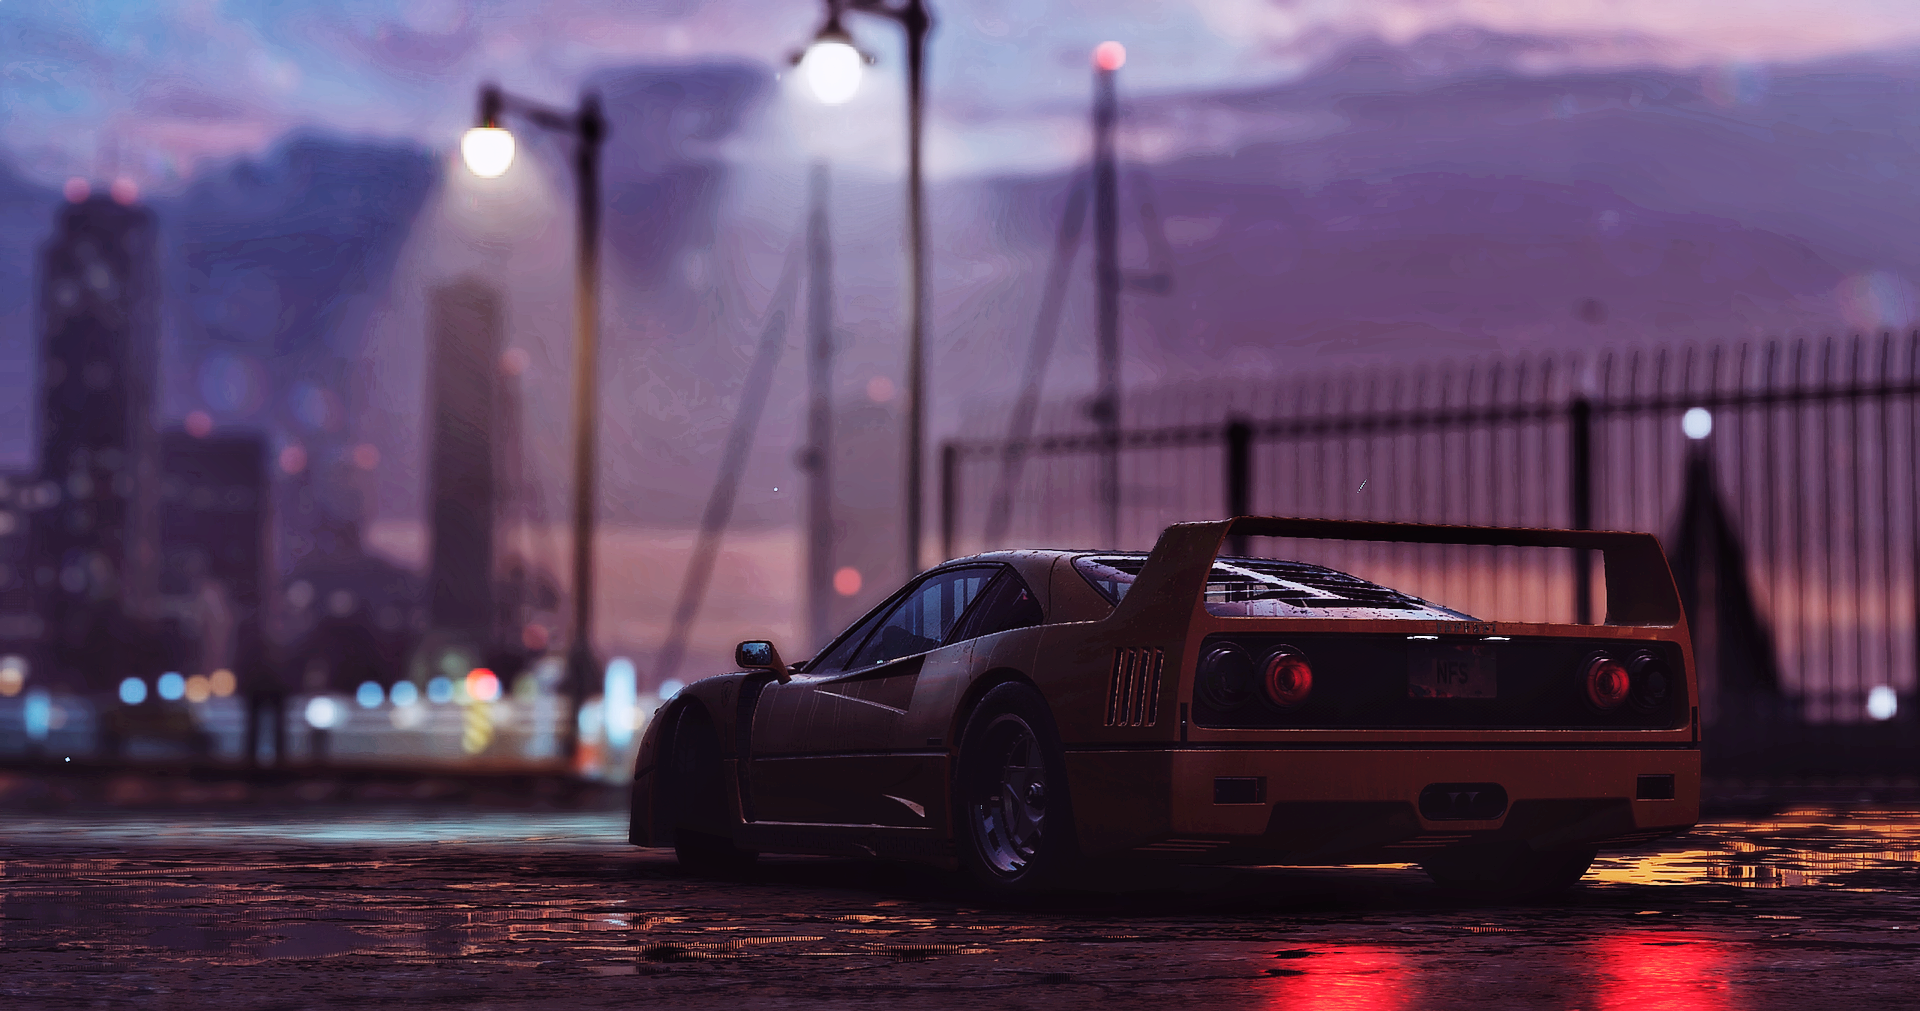 General 1920x1011 Need for speed Unbound Need for Speed edit race cars car park car 4K gaming video games drift EA Games Criterion Games night taillights street light